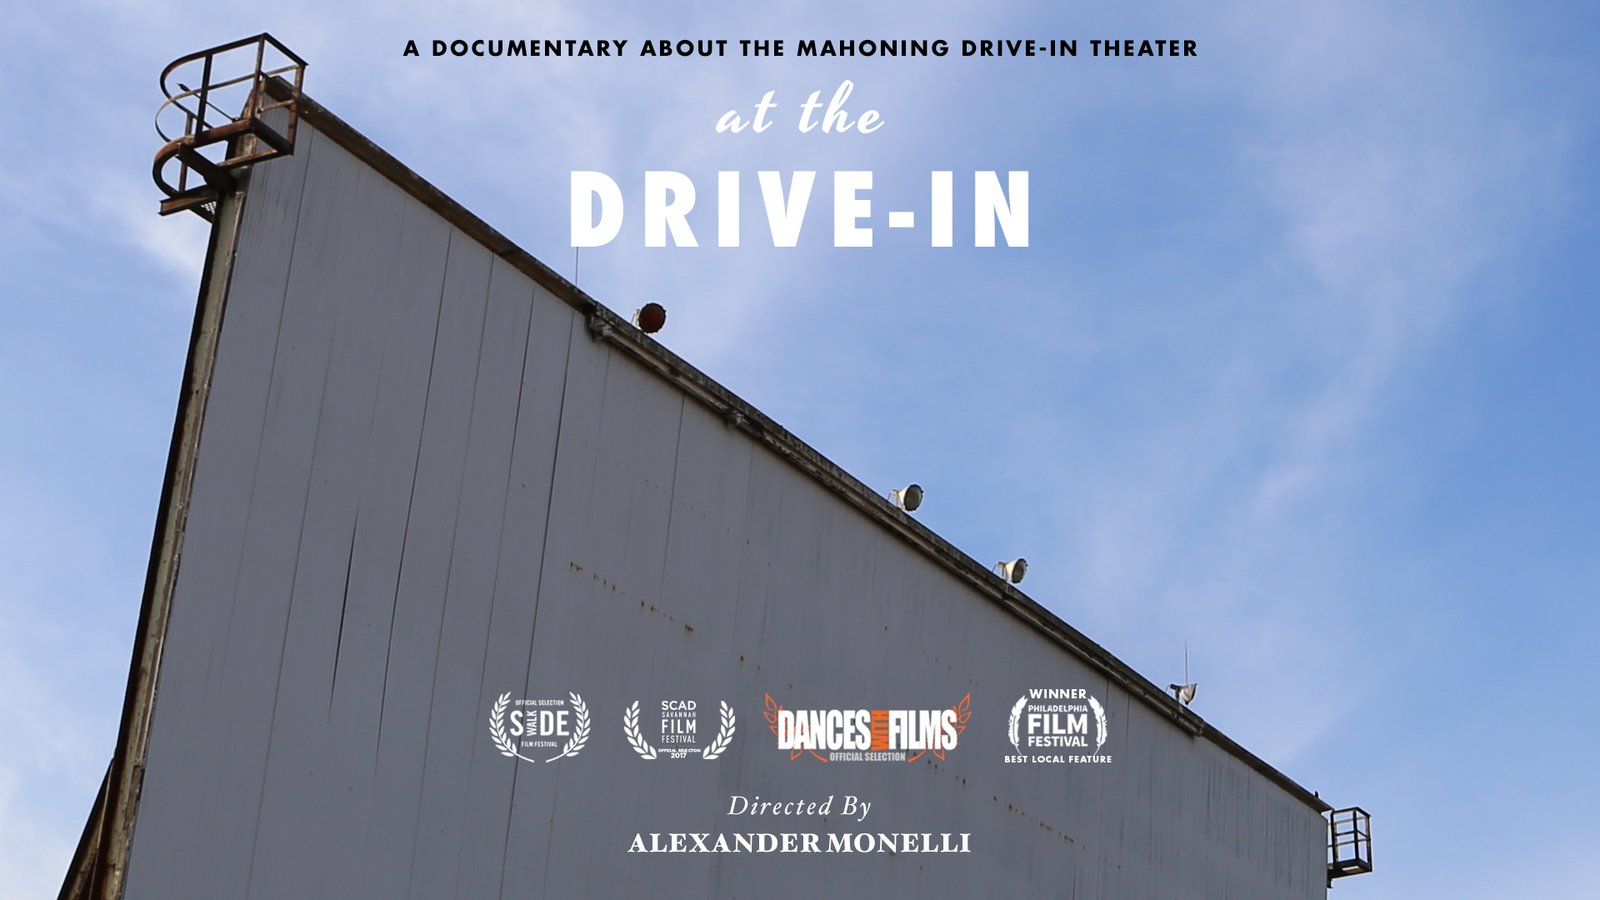 At The Drive-In - Saving the The Mahoning Drive-in Theater